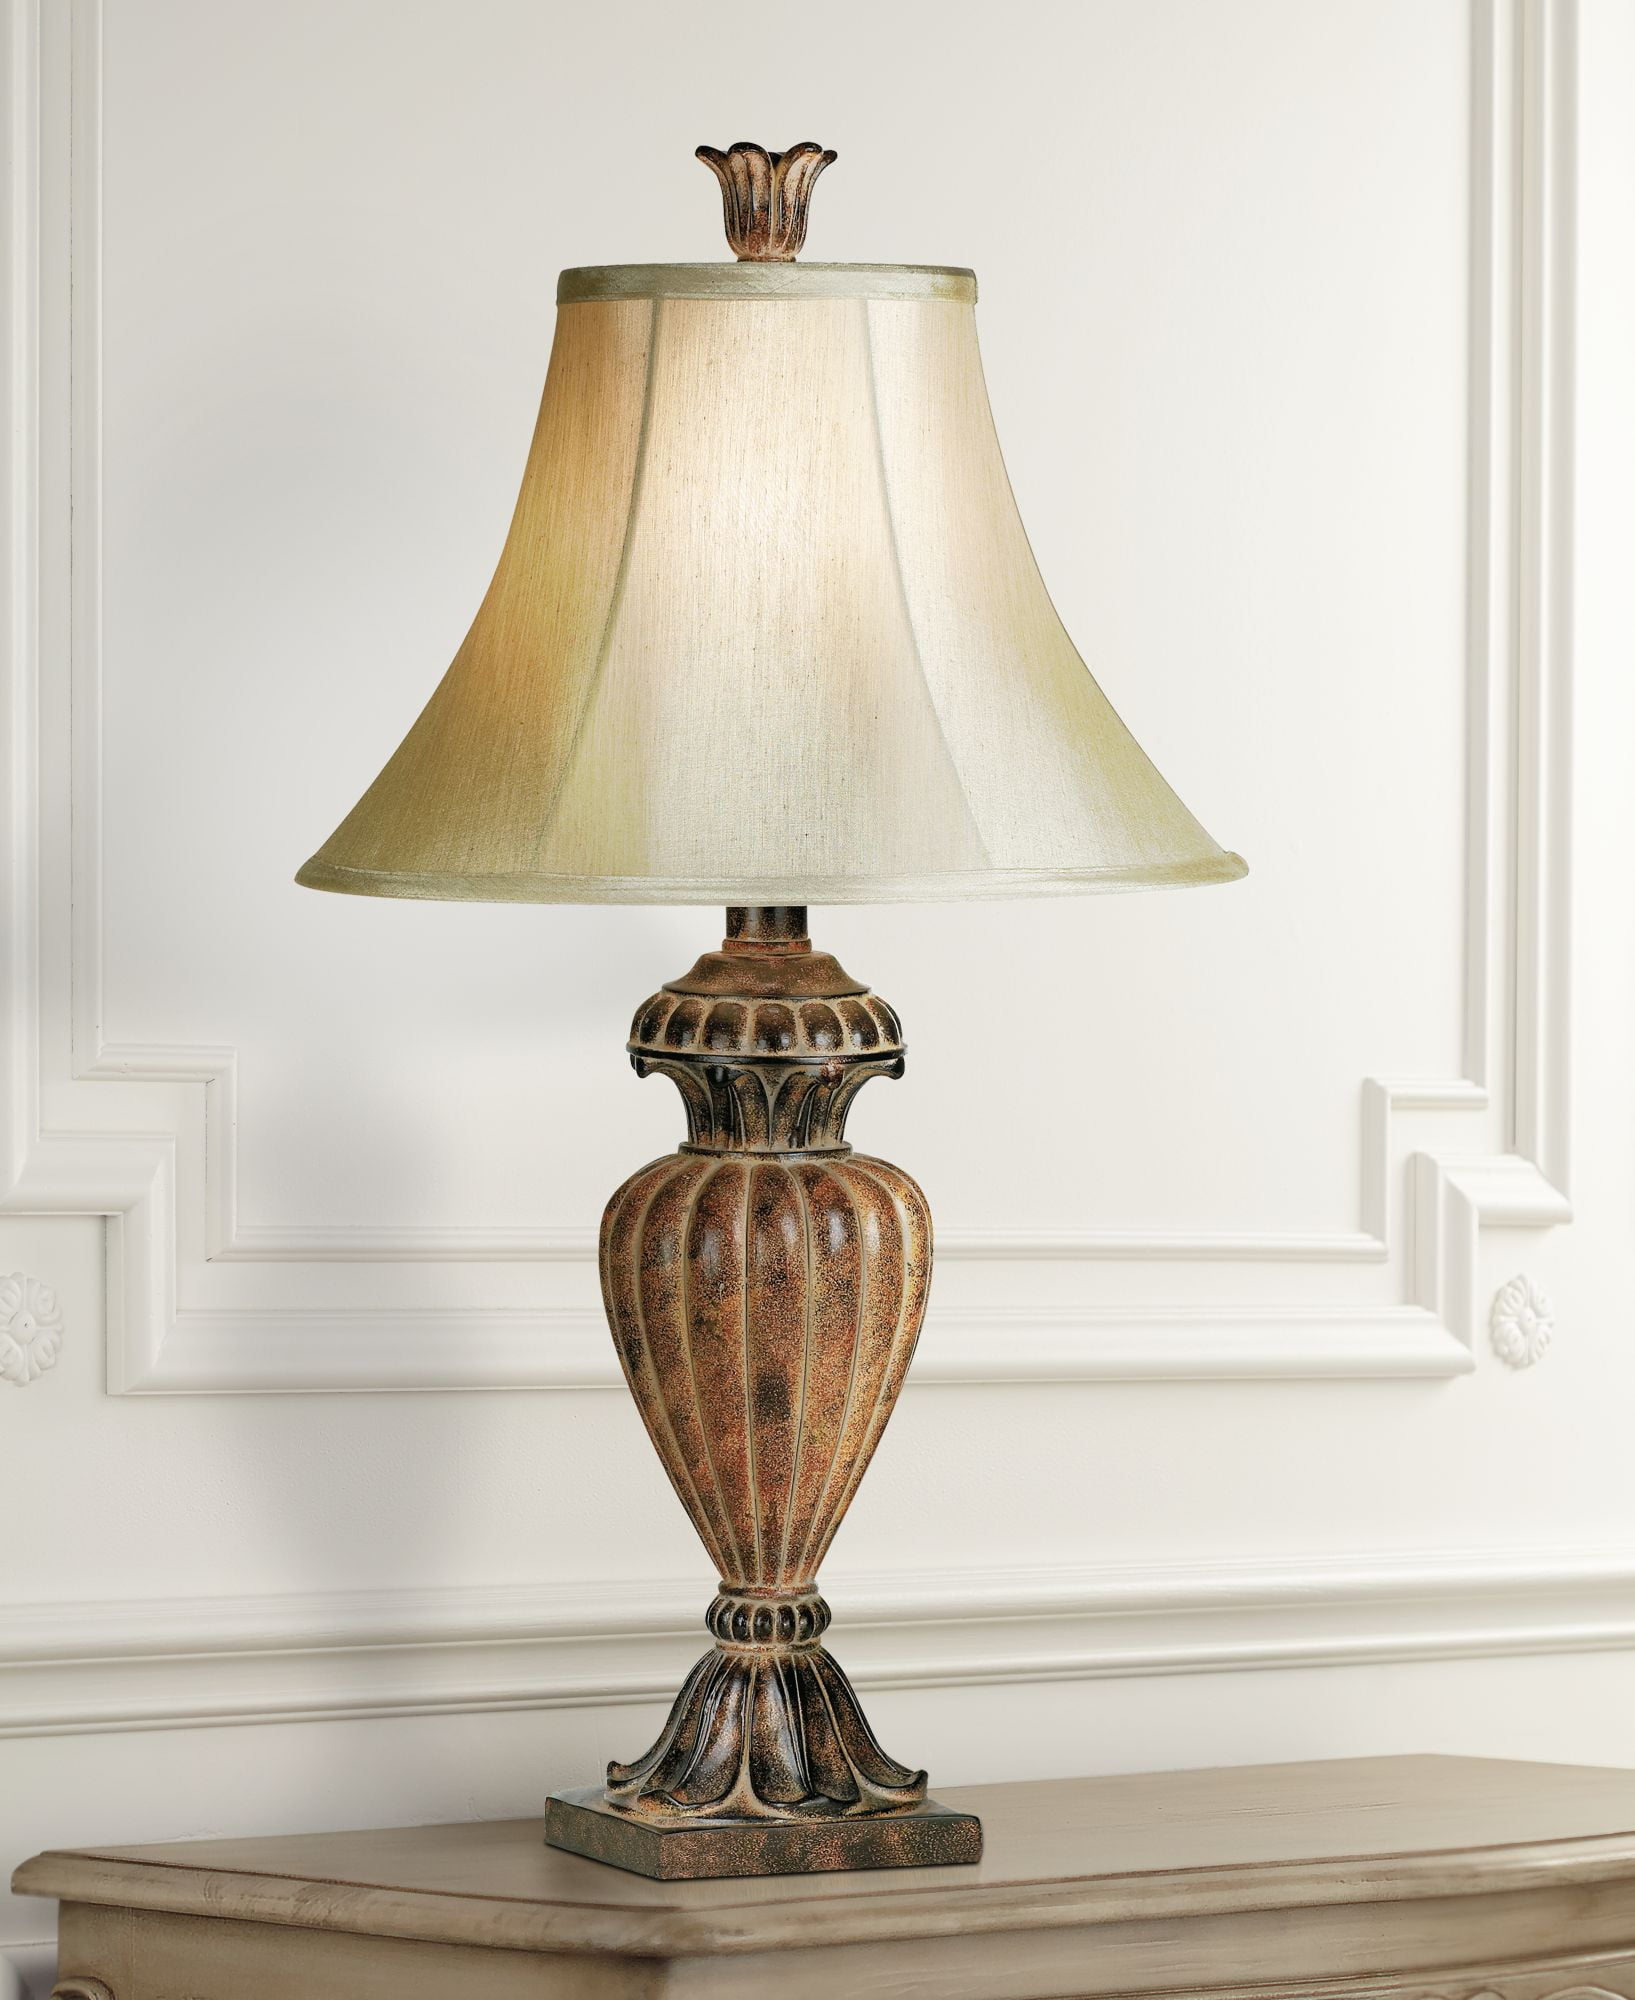 Regency Hill Traditional Table Lamp Urn, Formal Living Room Table Lamps